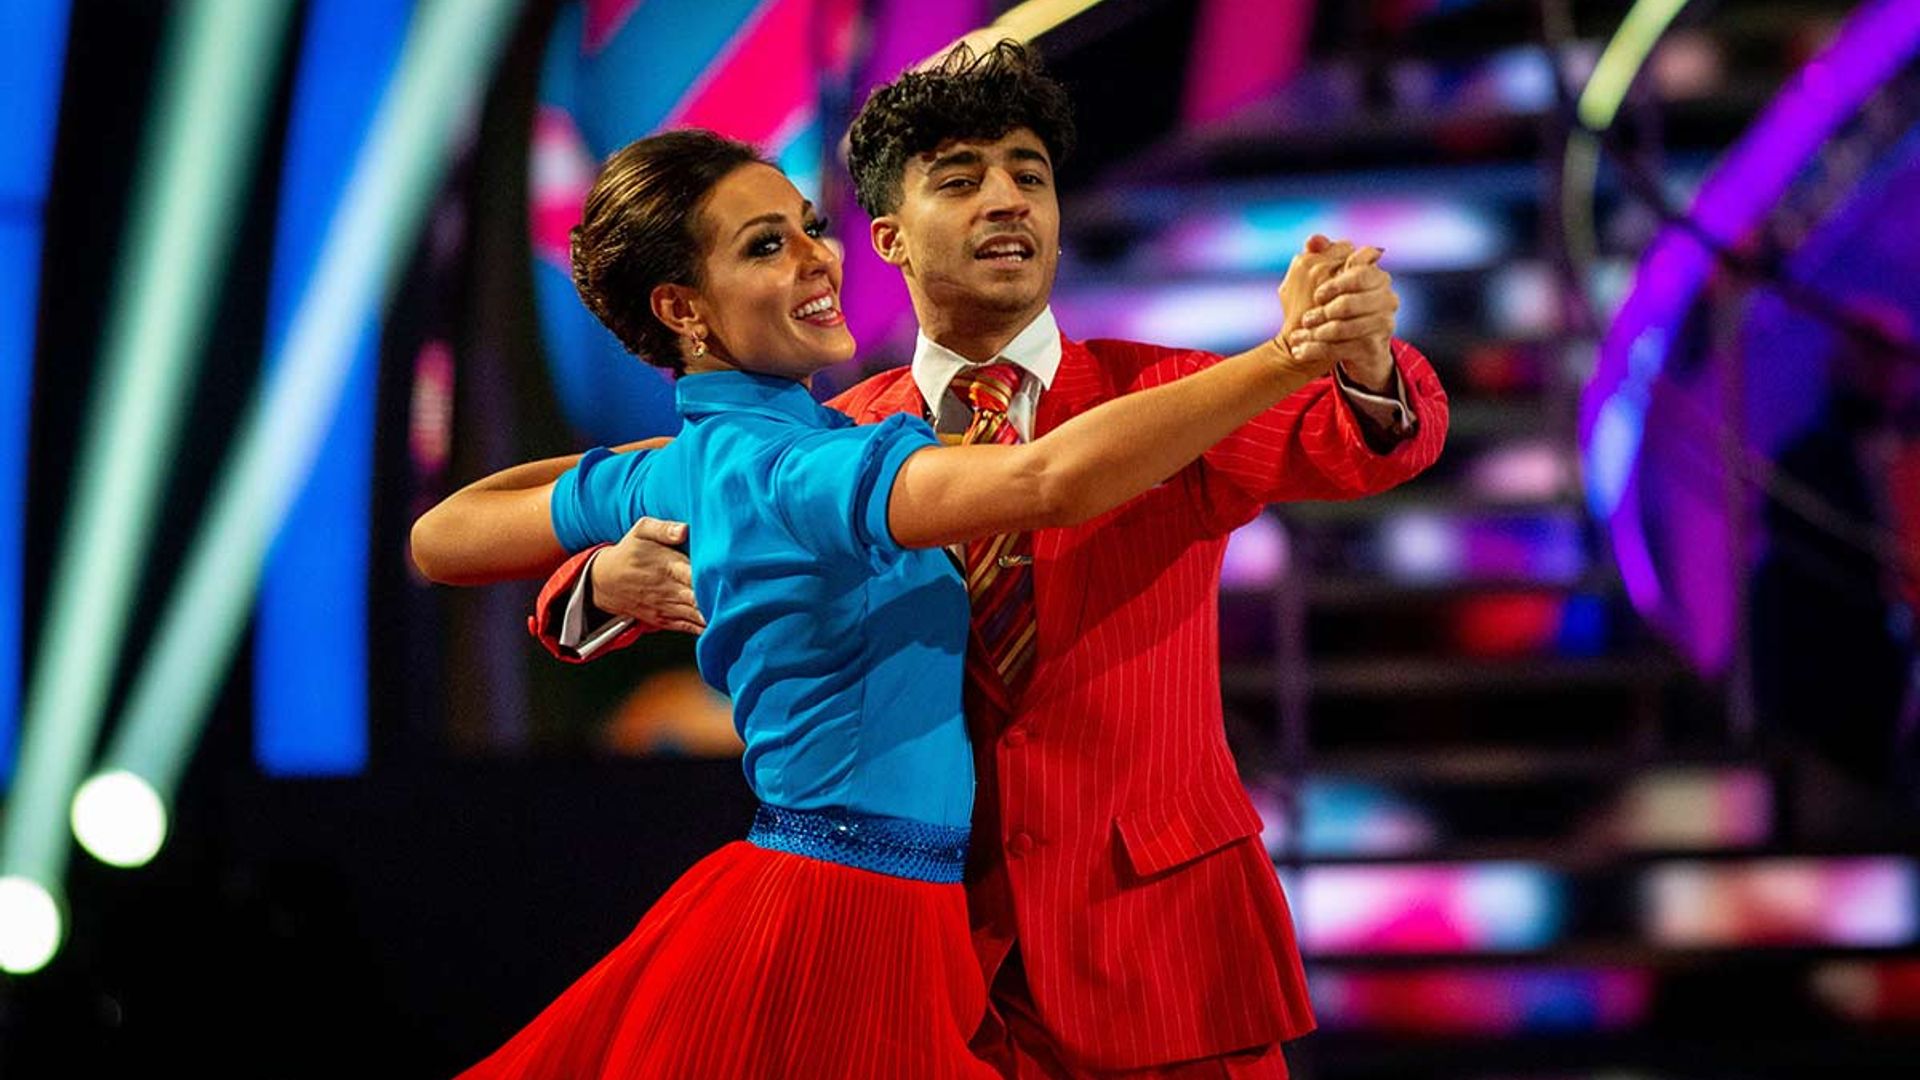 Strictly's Karim Zeroual cheered on by special guests as he's awarded four tens